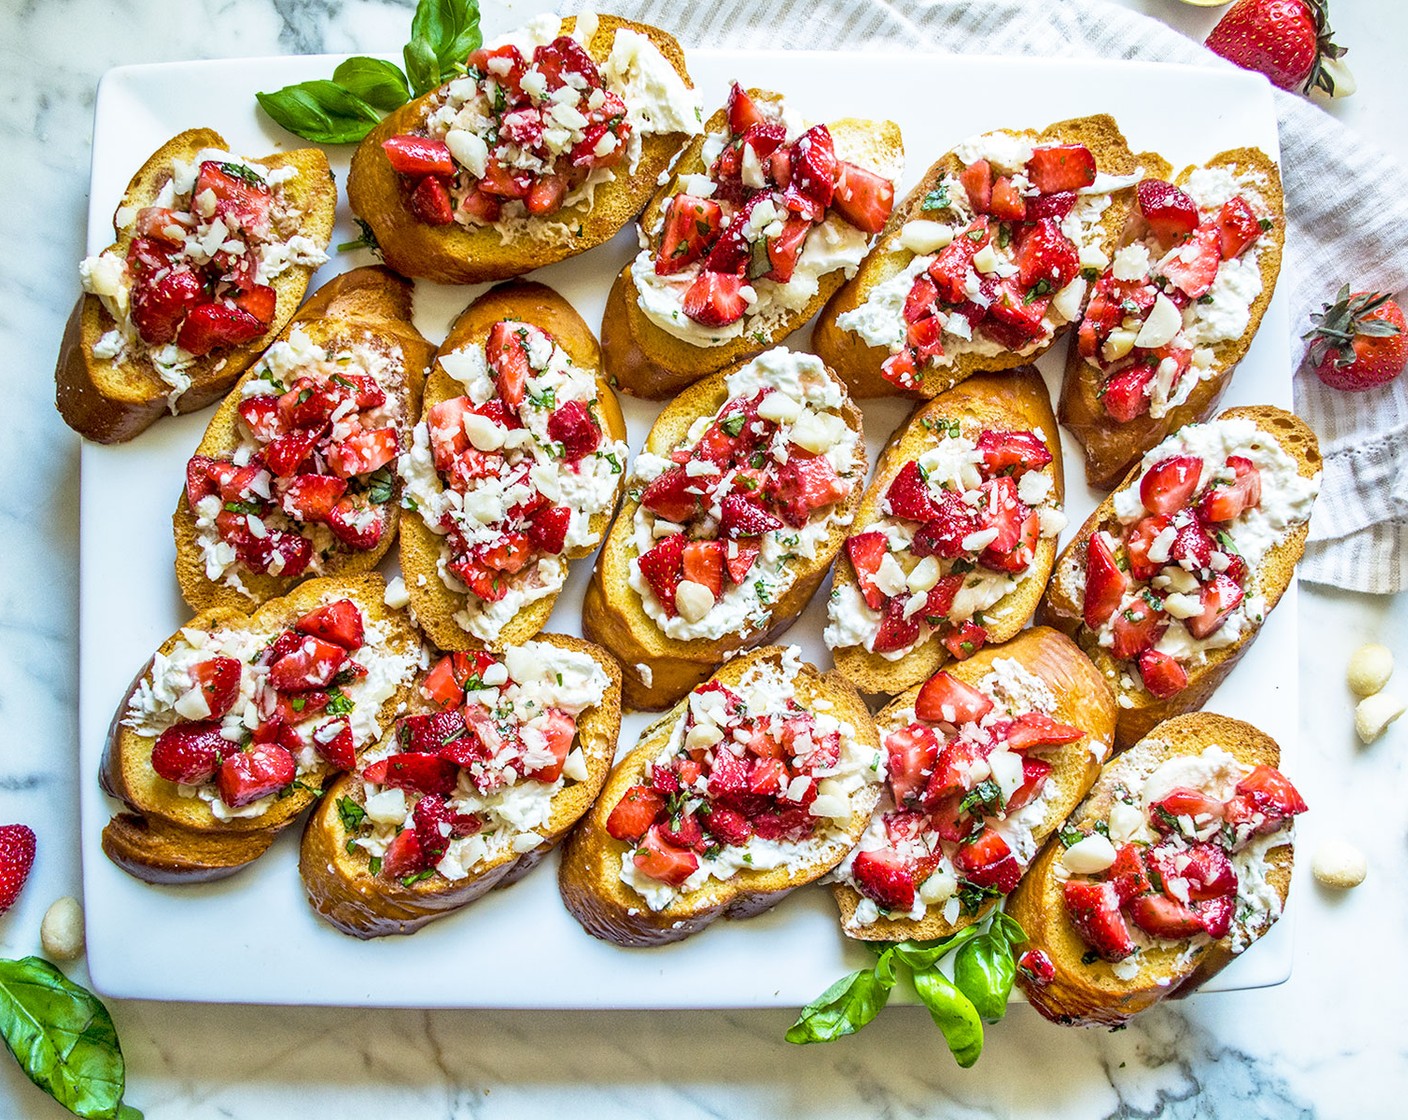 step 8 Using the remaining olive oil and balsamic reduction mixture left from the strawberries, carefully drizzle a small spoonful over each bruschetta slice. Serve fresh and enjoy!